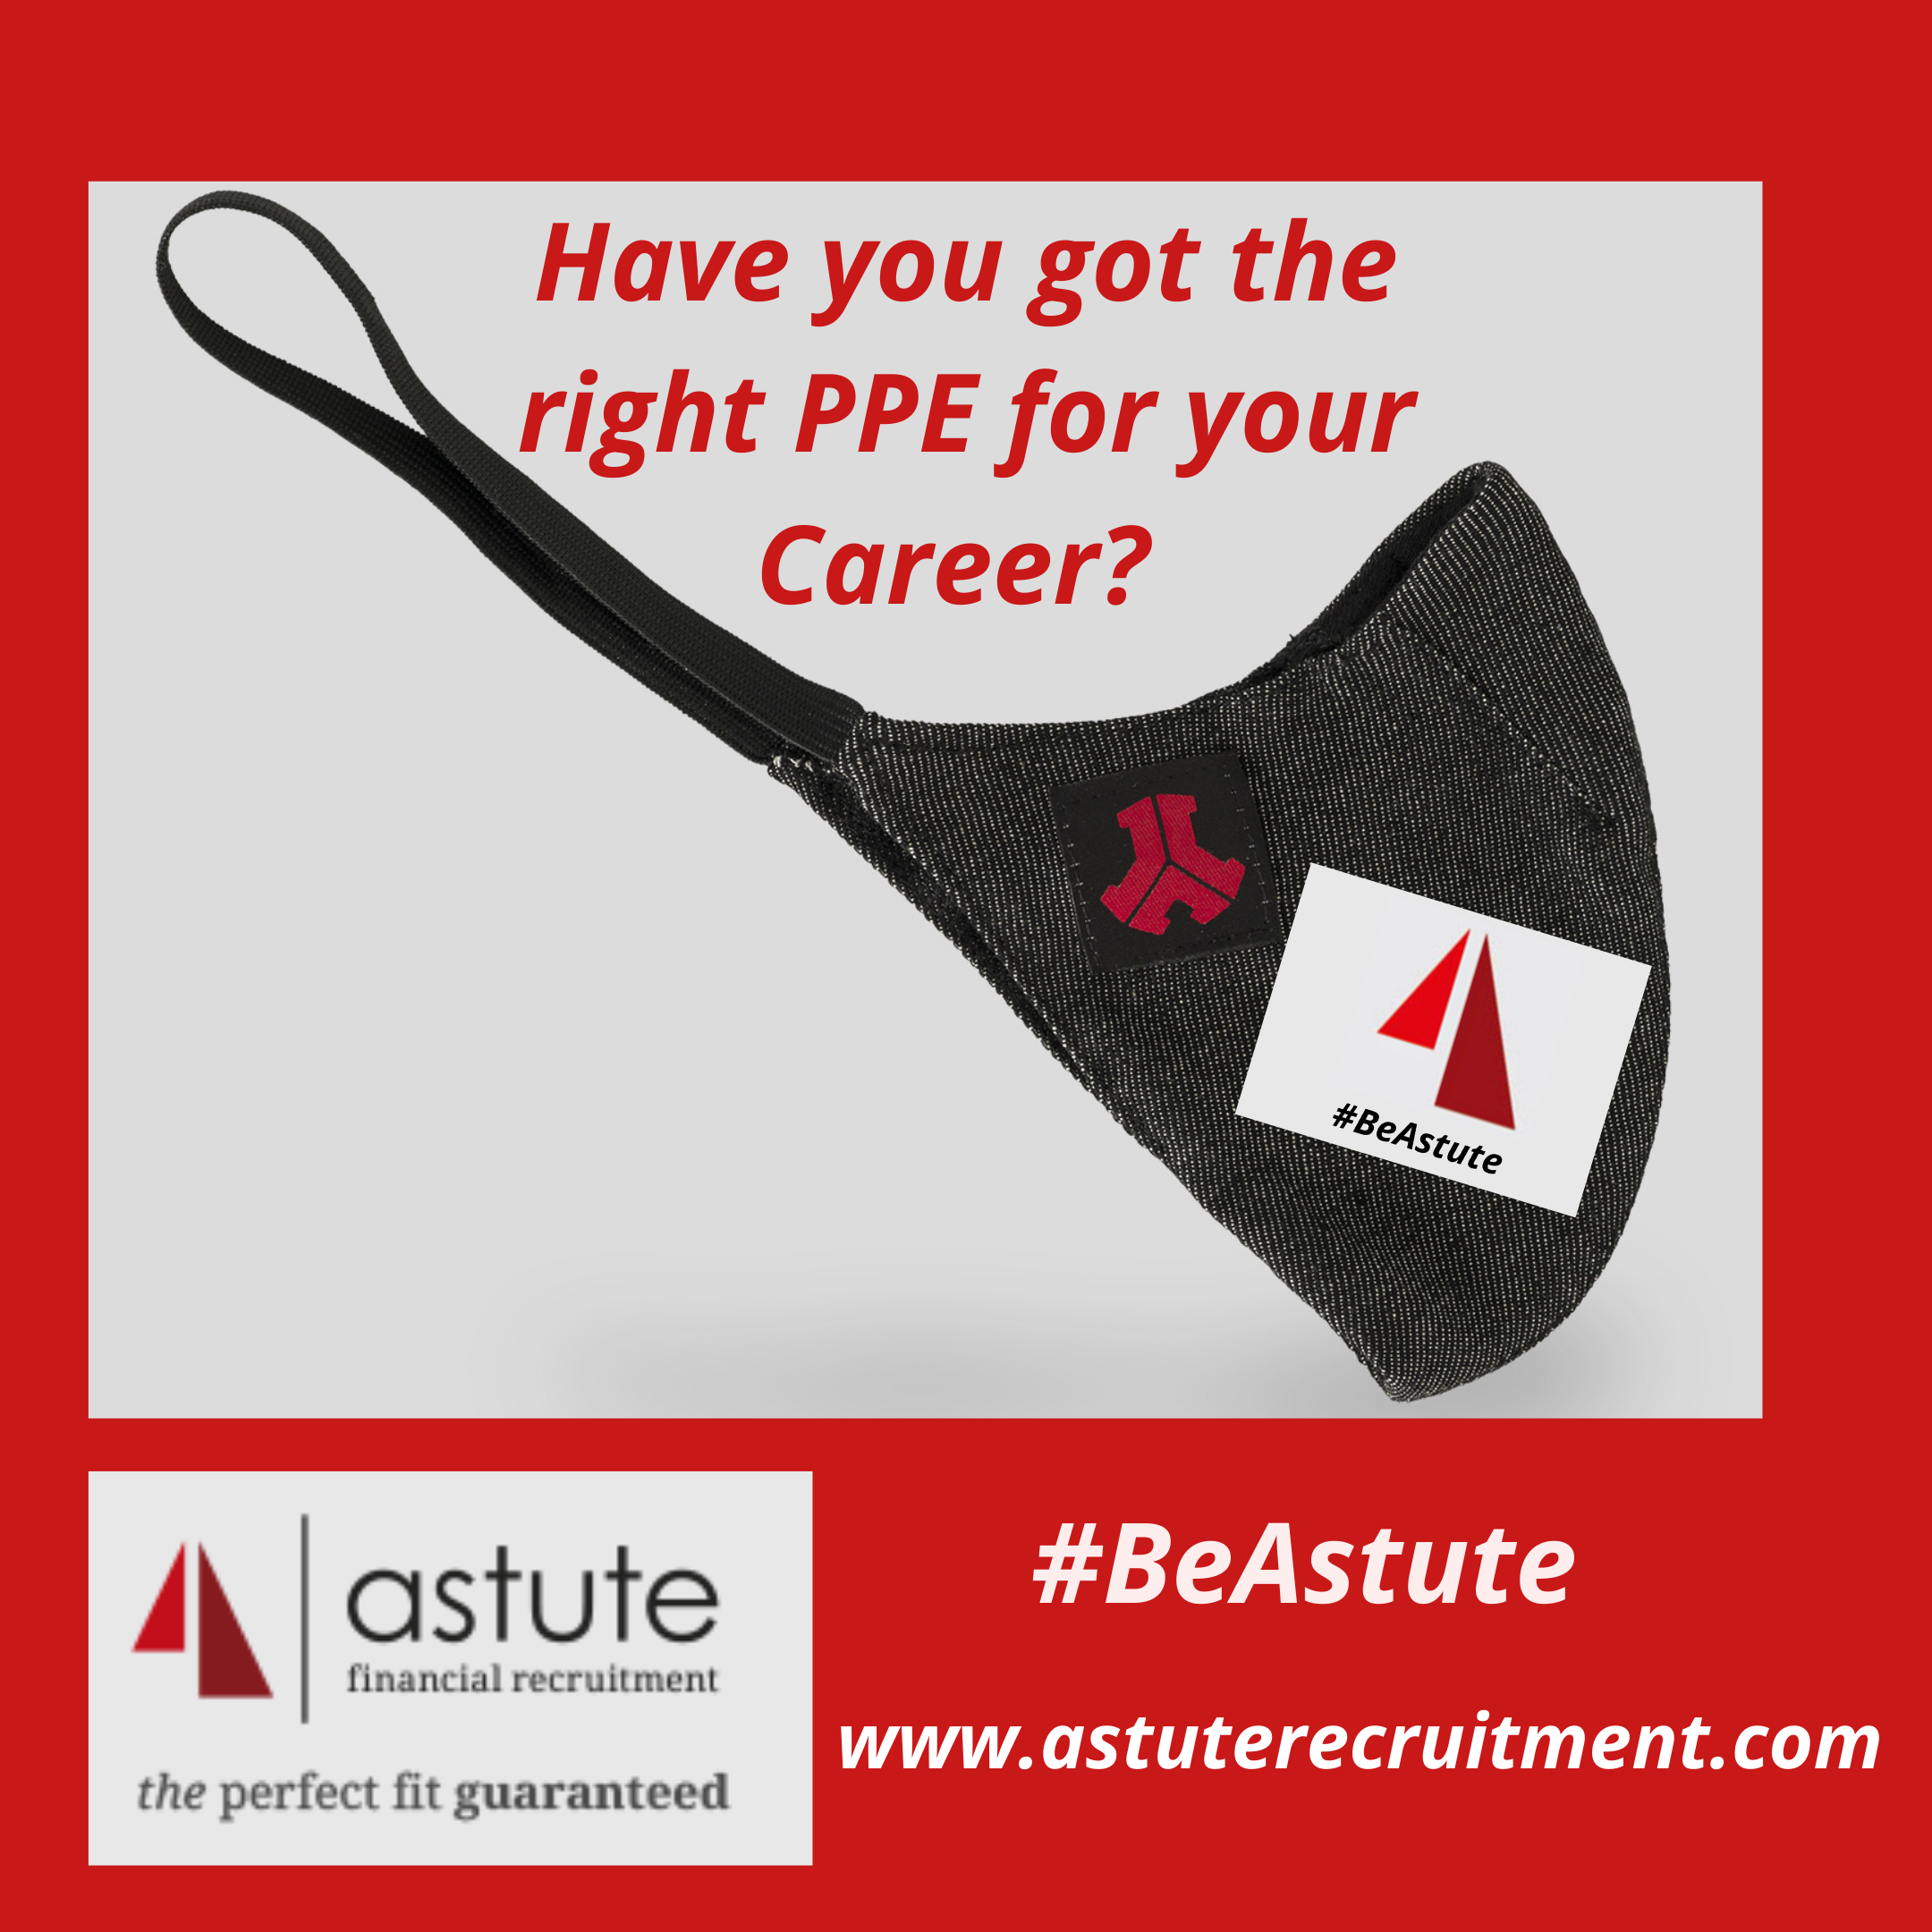 Have you got the right PPE for your career?